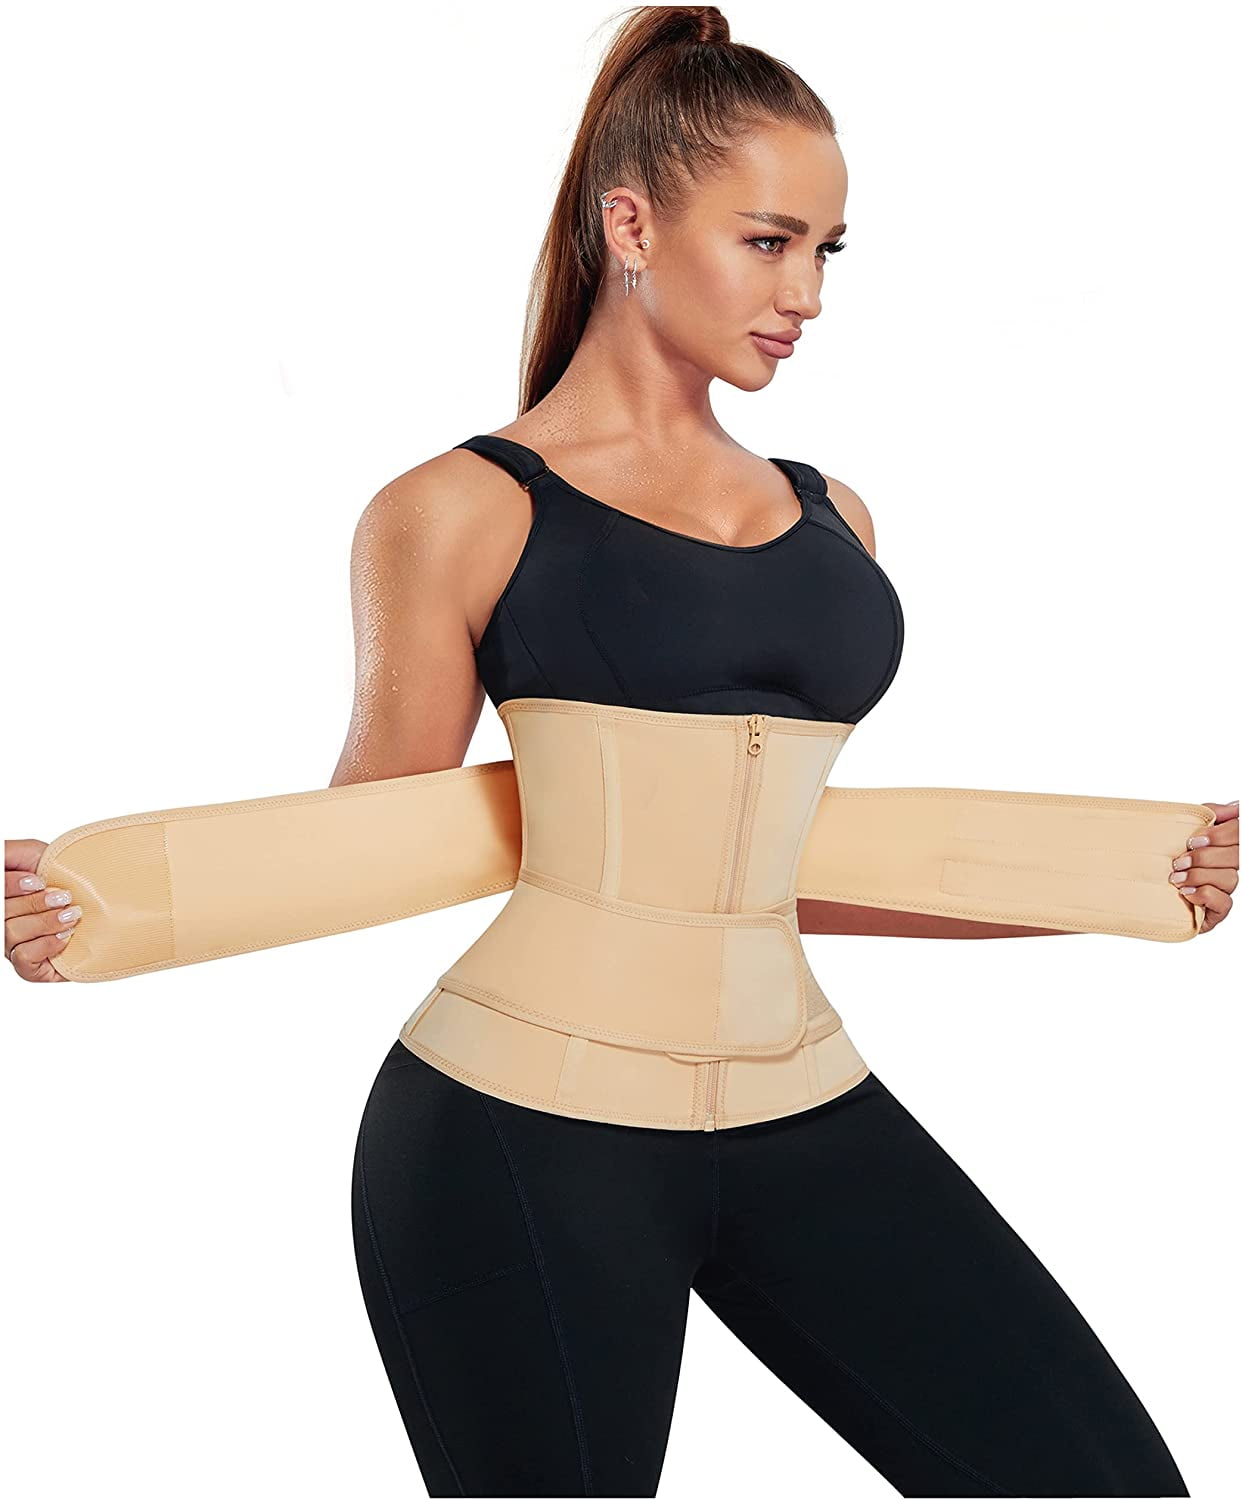 Gotoly Quick Weight Loss, Adjustable Straps Body Turkey